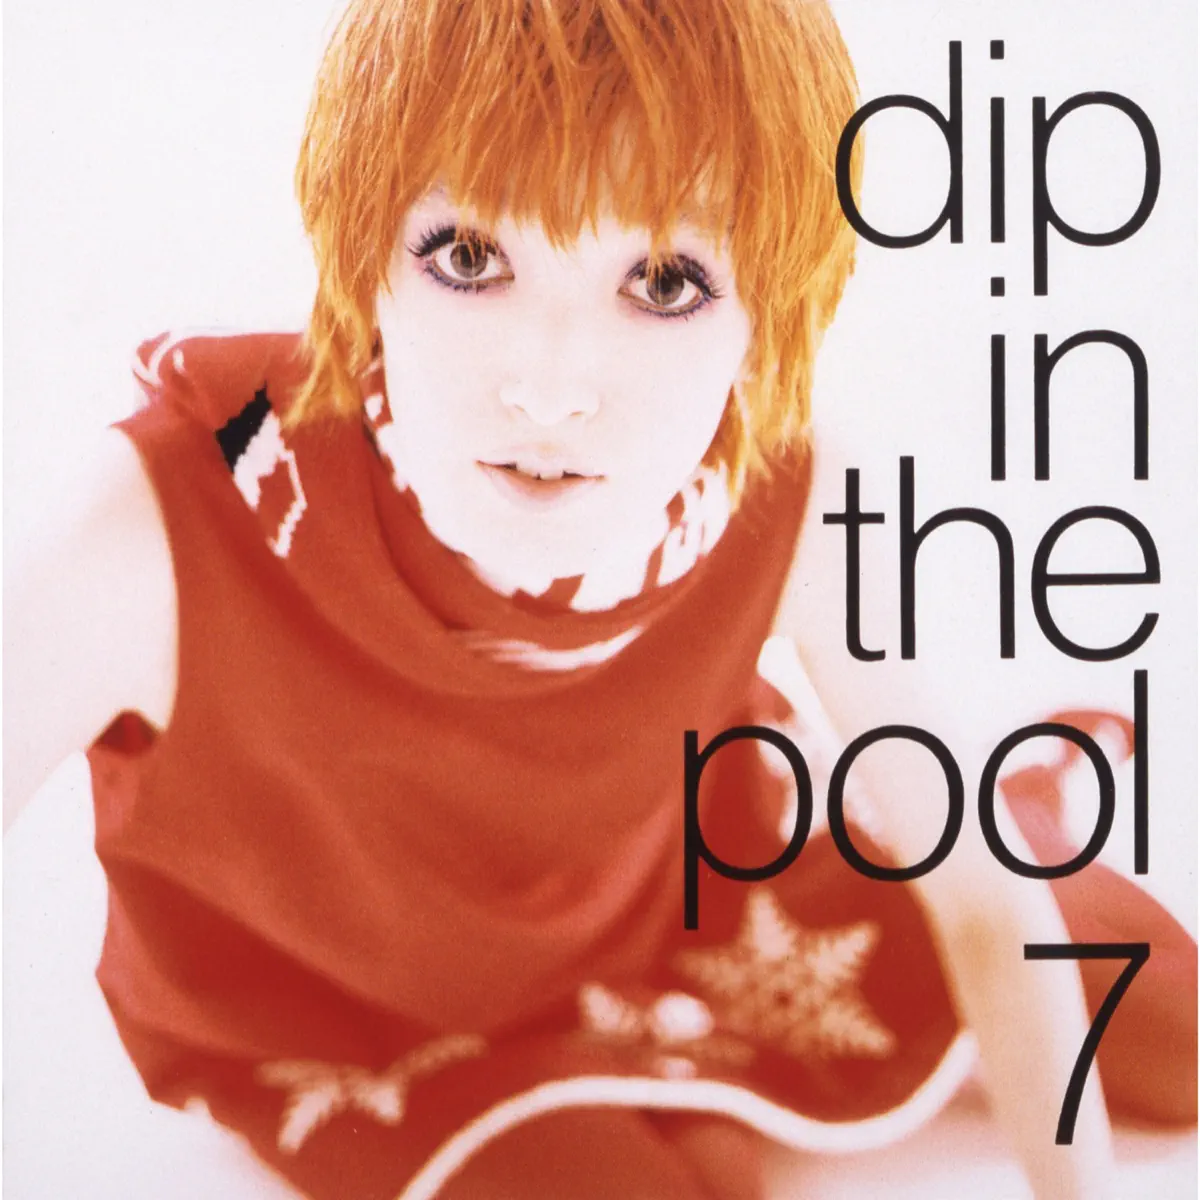 dip in the pool - Seven (1994) [iTunes Plus AAC M4A]-新房子